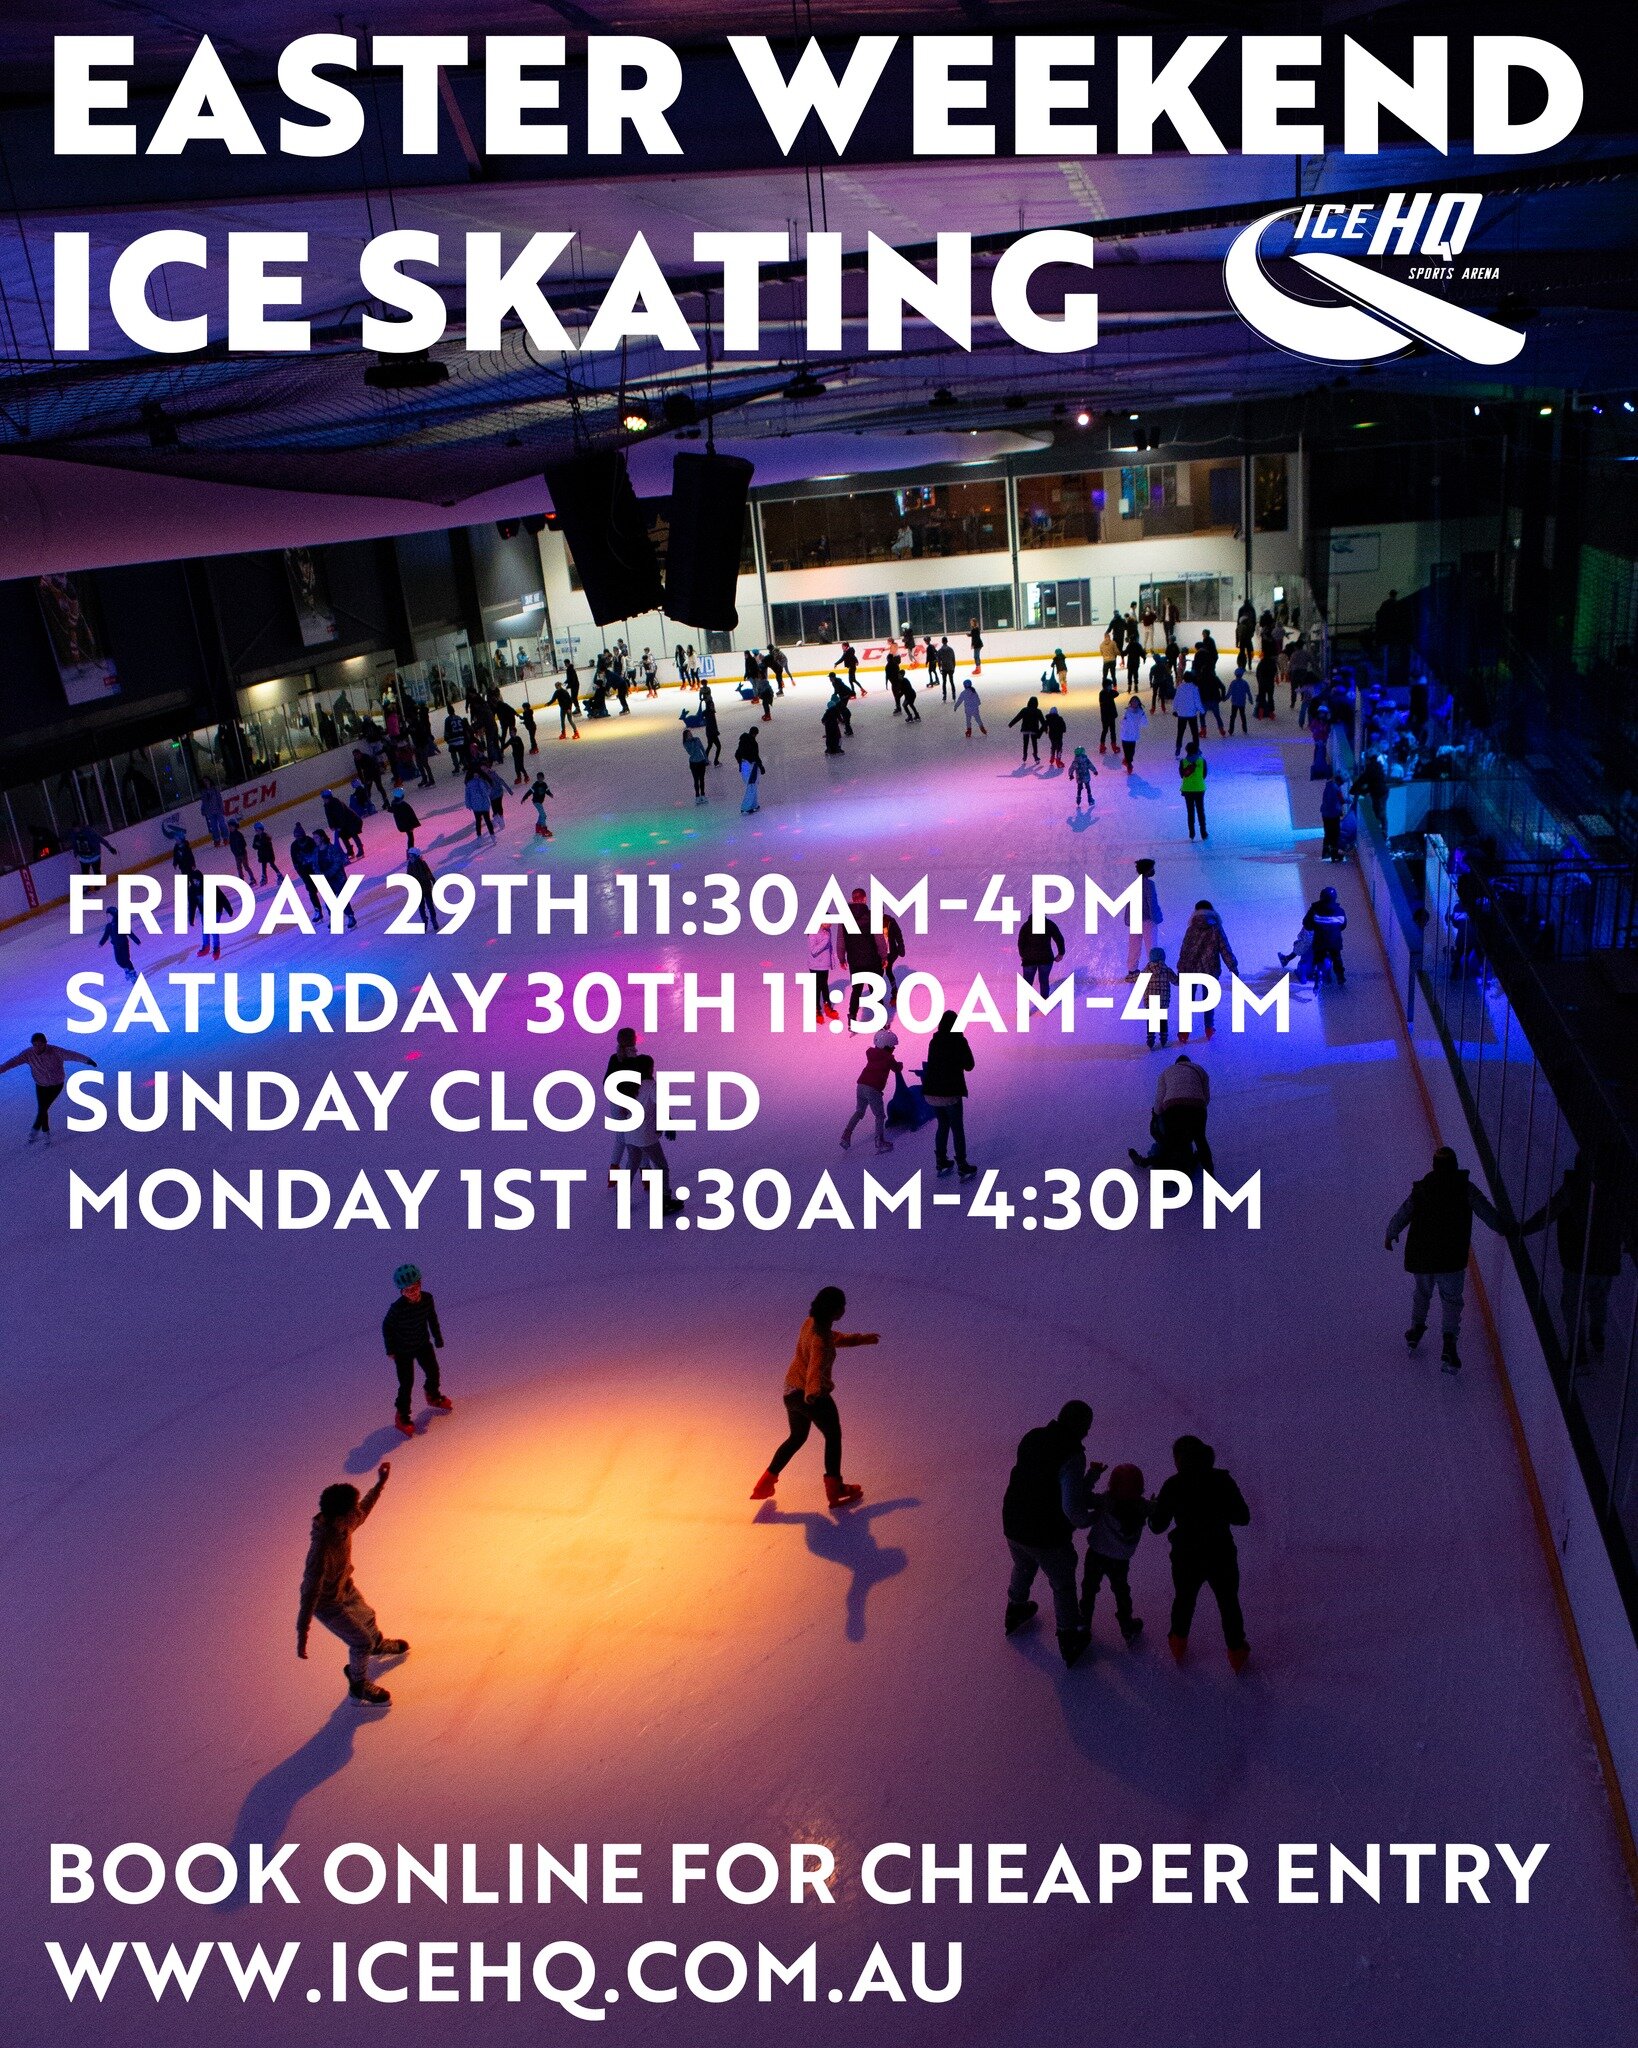 Four day weekend coming up 🤗⛸️
We'll be open:
Friday 29th 11:30am-4pm
Saturday 30th 11:30am-4pm
Sunday Closed
Monday 1st 11:30am-4:30pm 

Then we'll be open everyday of the school holidays, 11:30am-4:30pm with some days 11:30am-4pm book via our webs